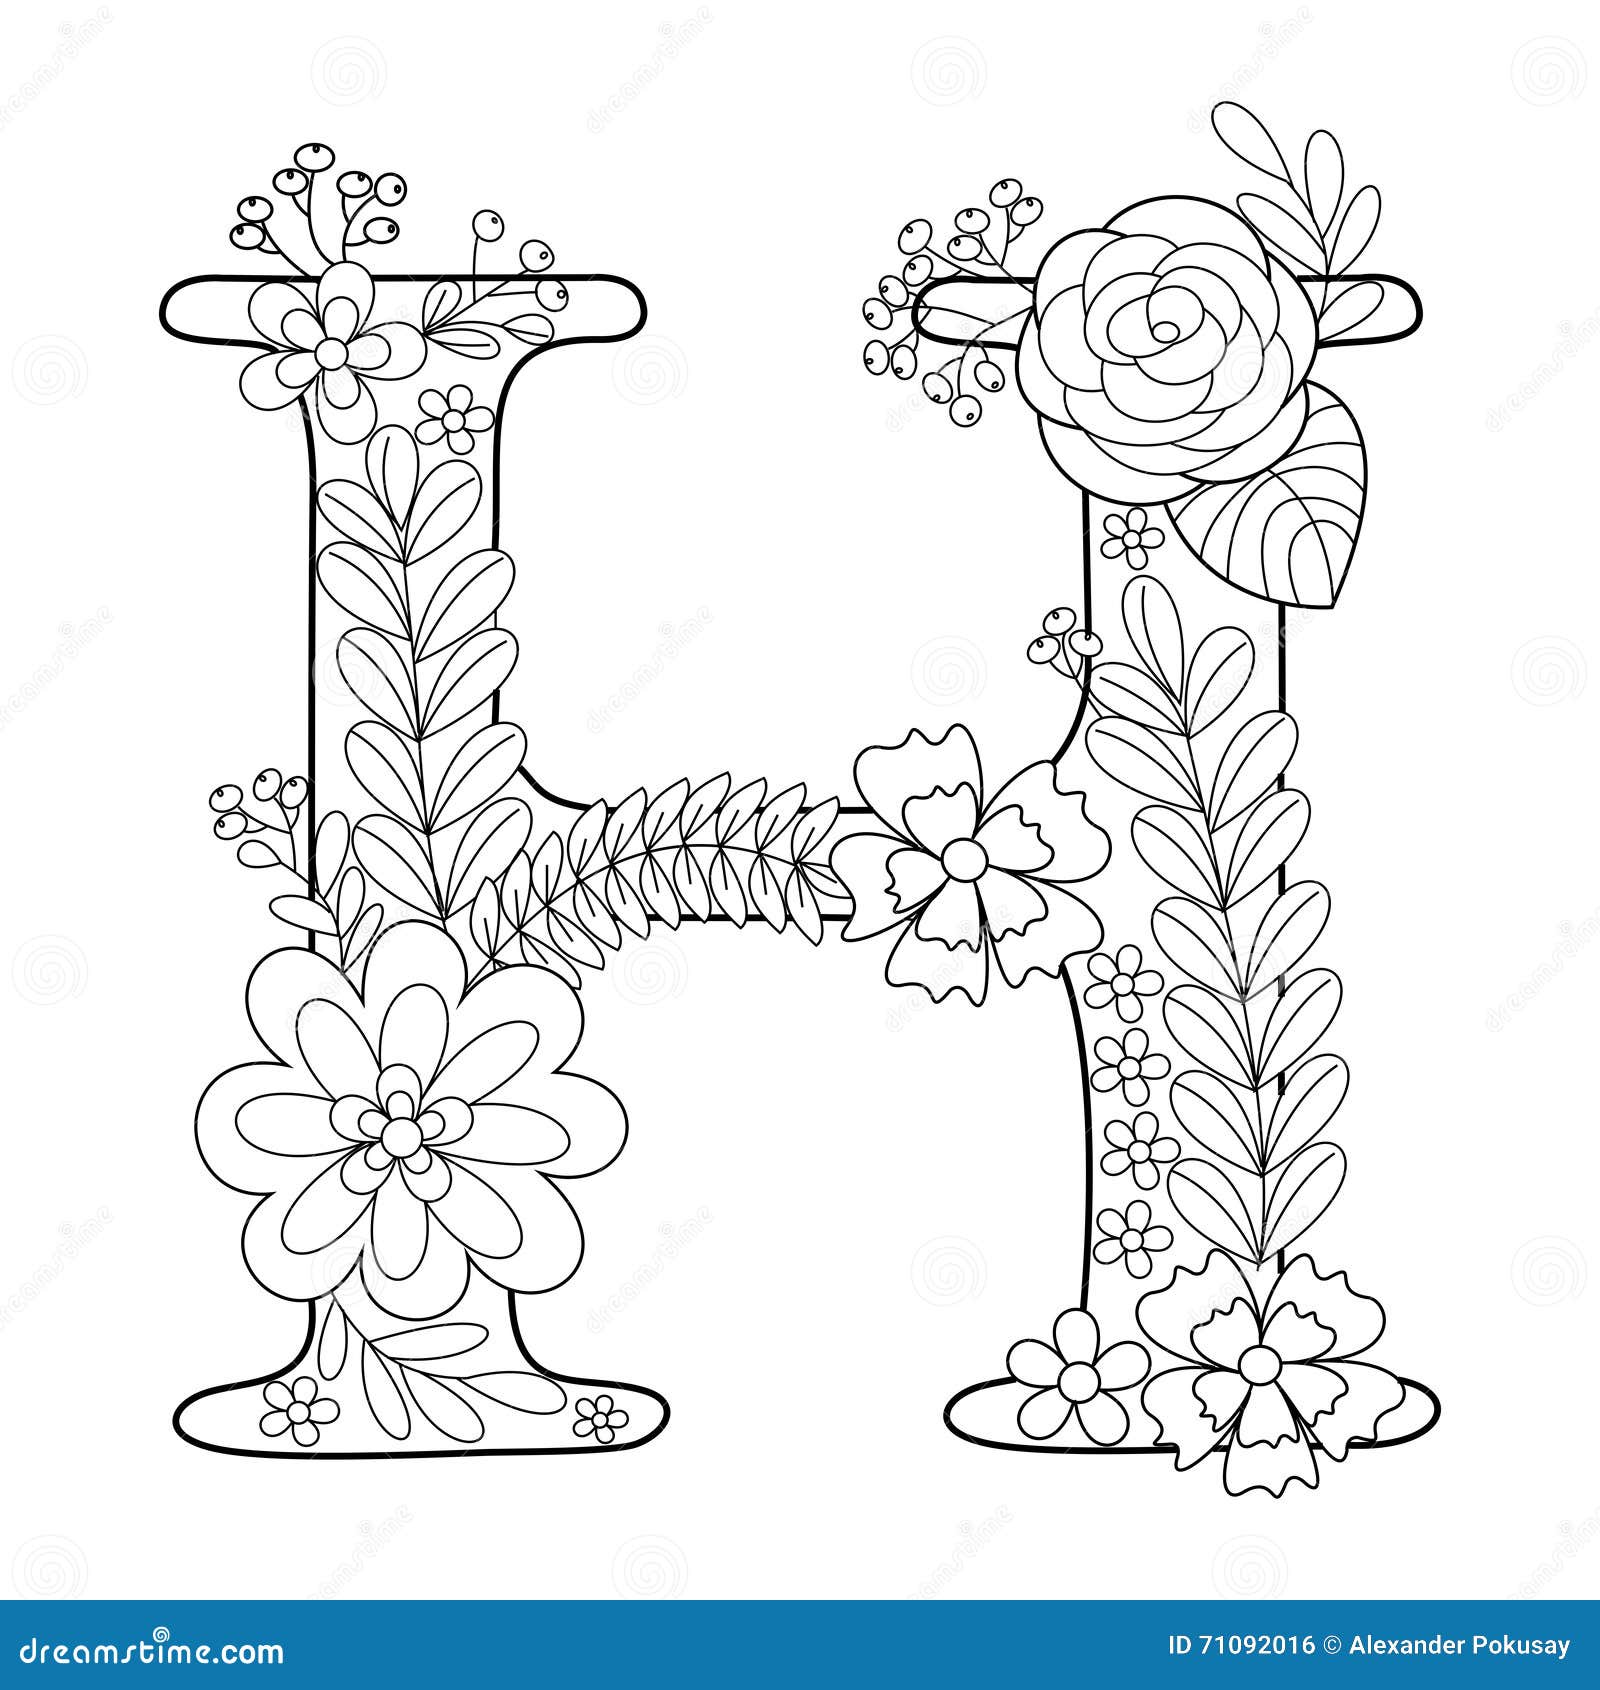 Letter H Coloring Pages Adult Coloring Pages